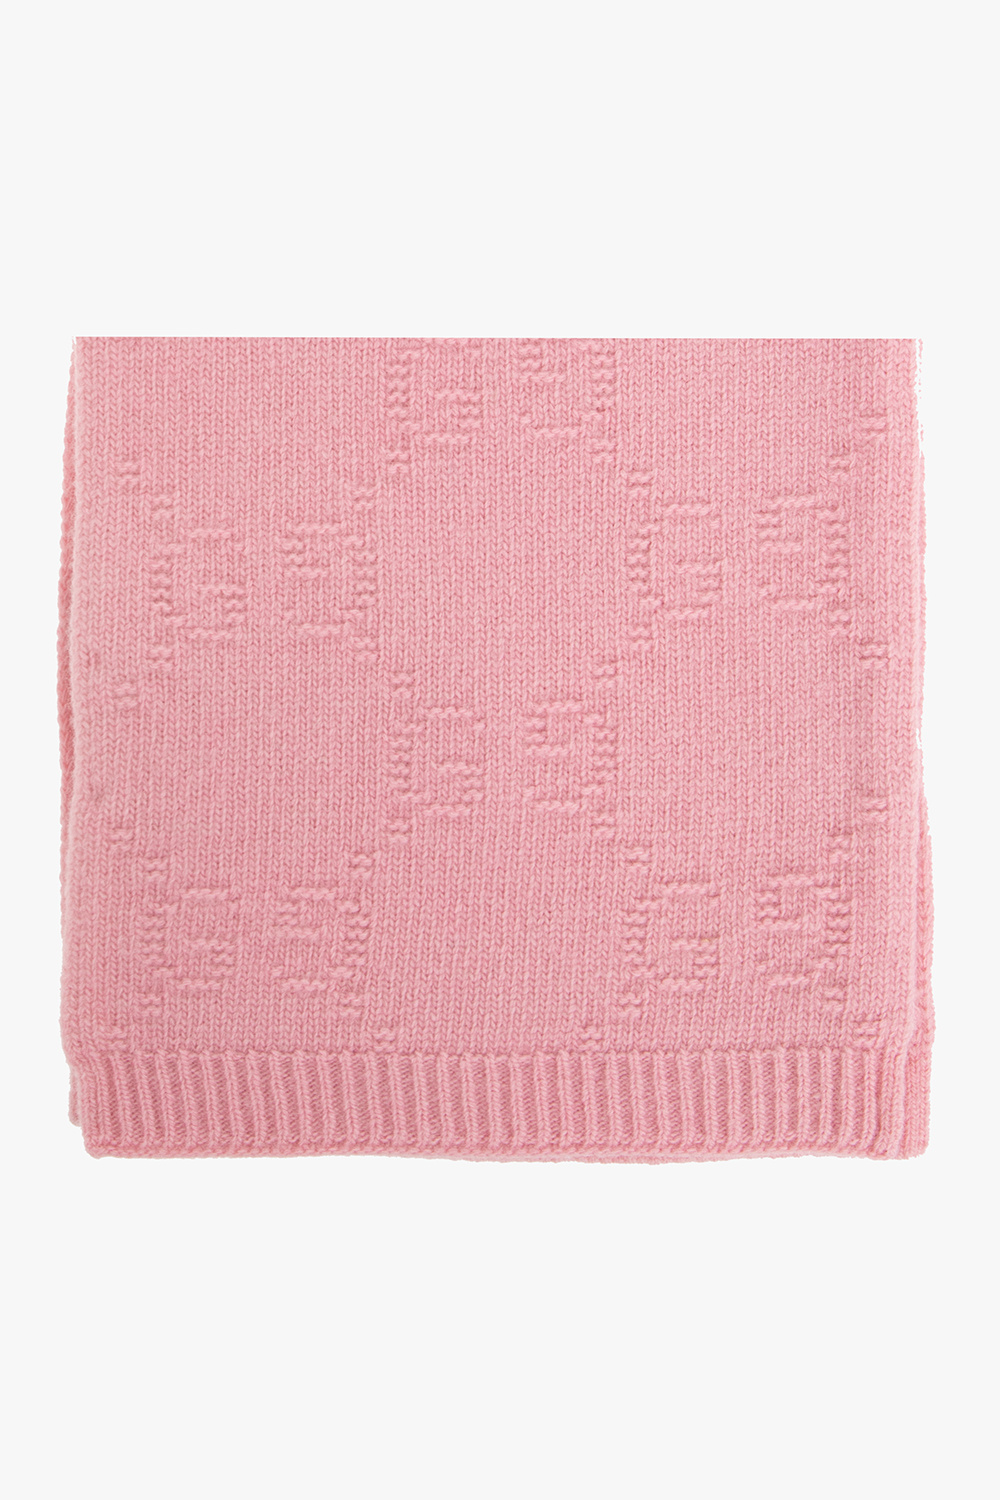 gucci for Kids Monogrammed scarf